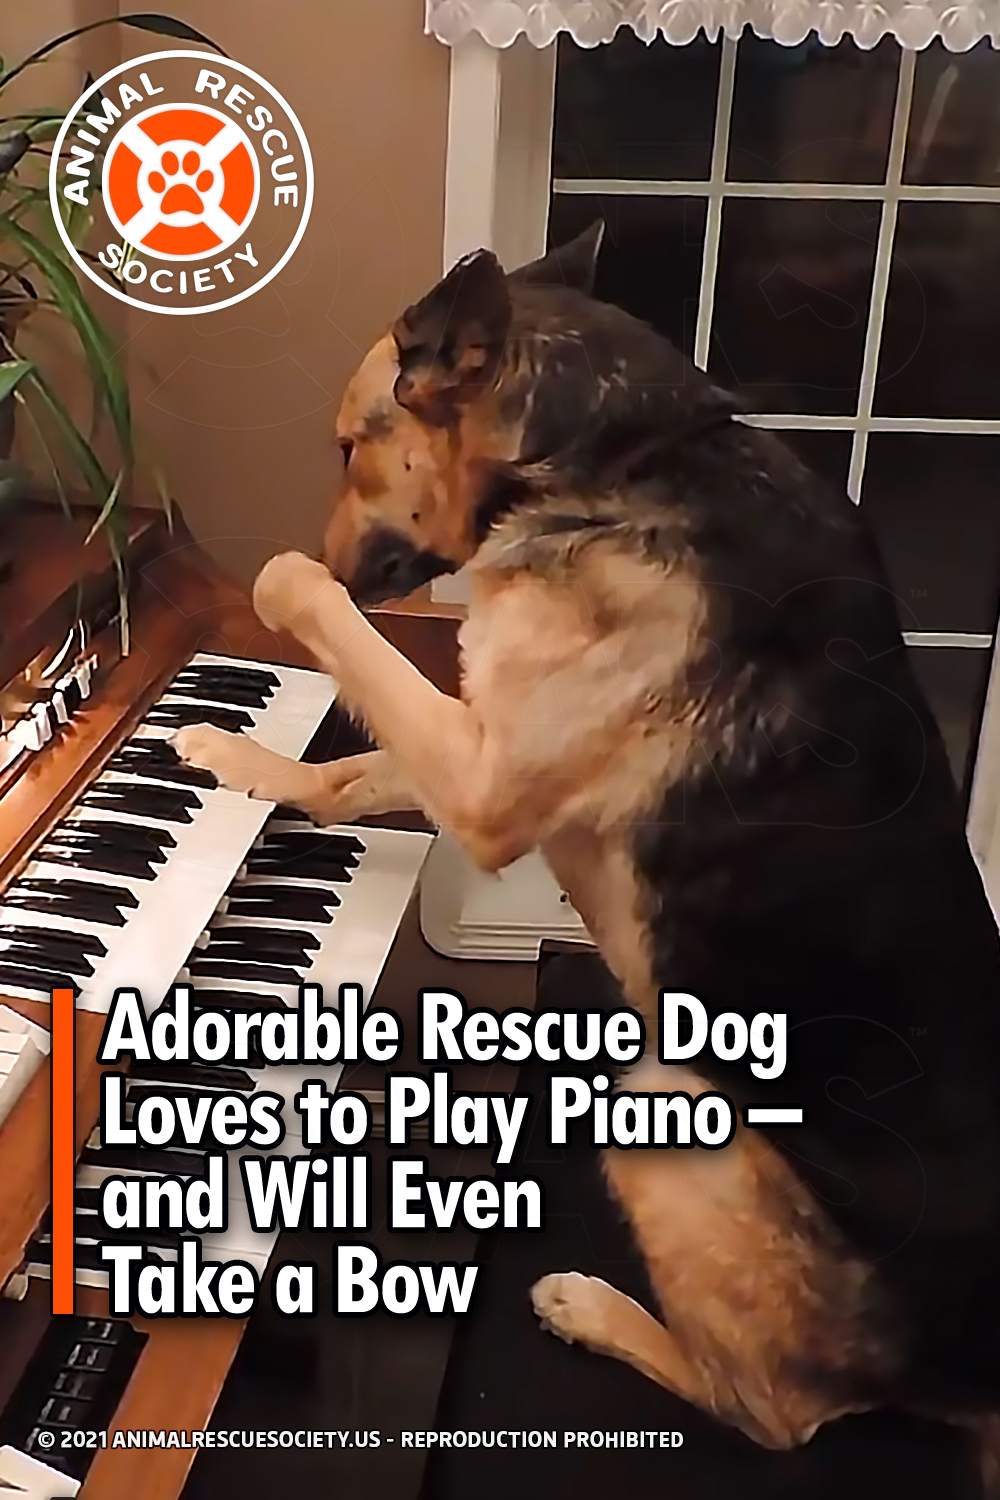 Adorable Rescue Dog Loves to Play Piano – and Will Even Take a Bow